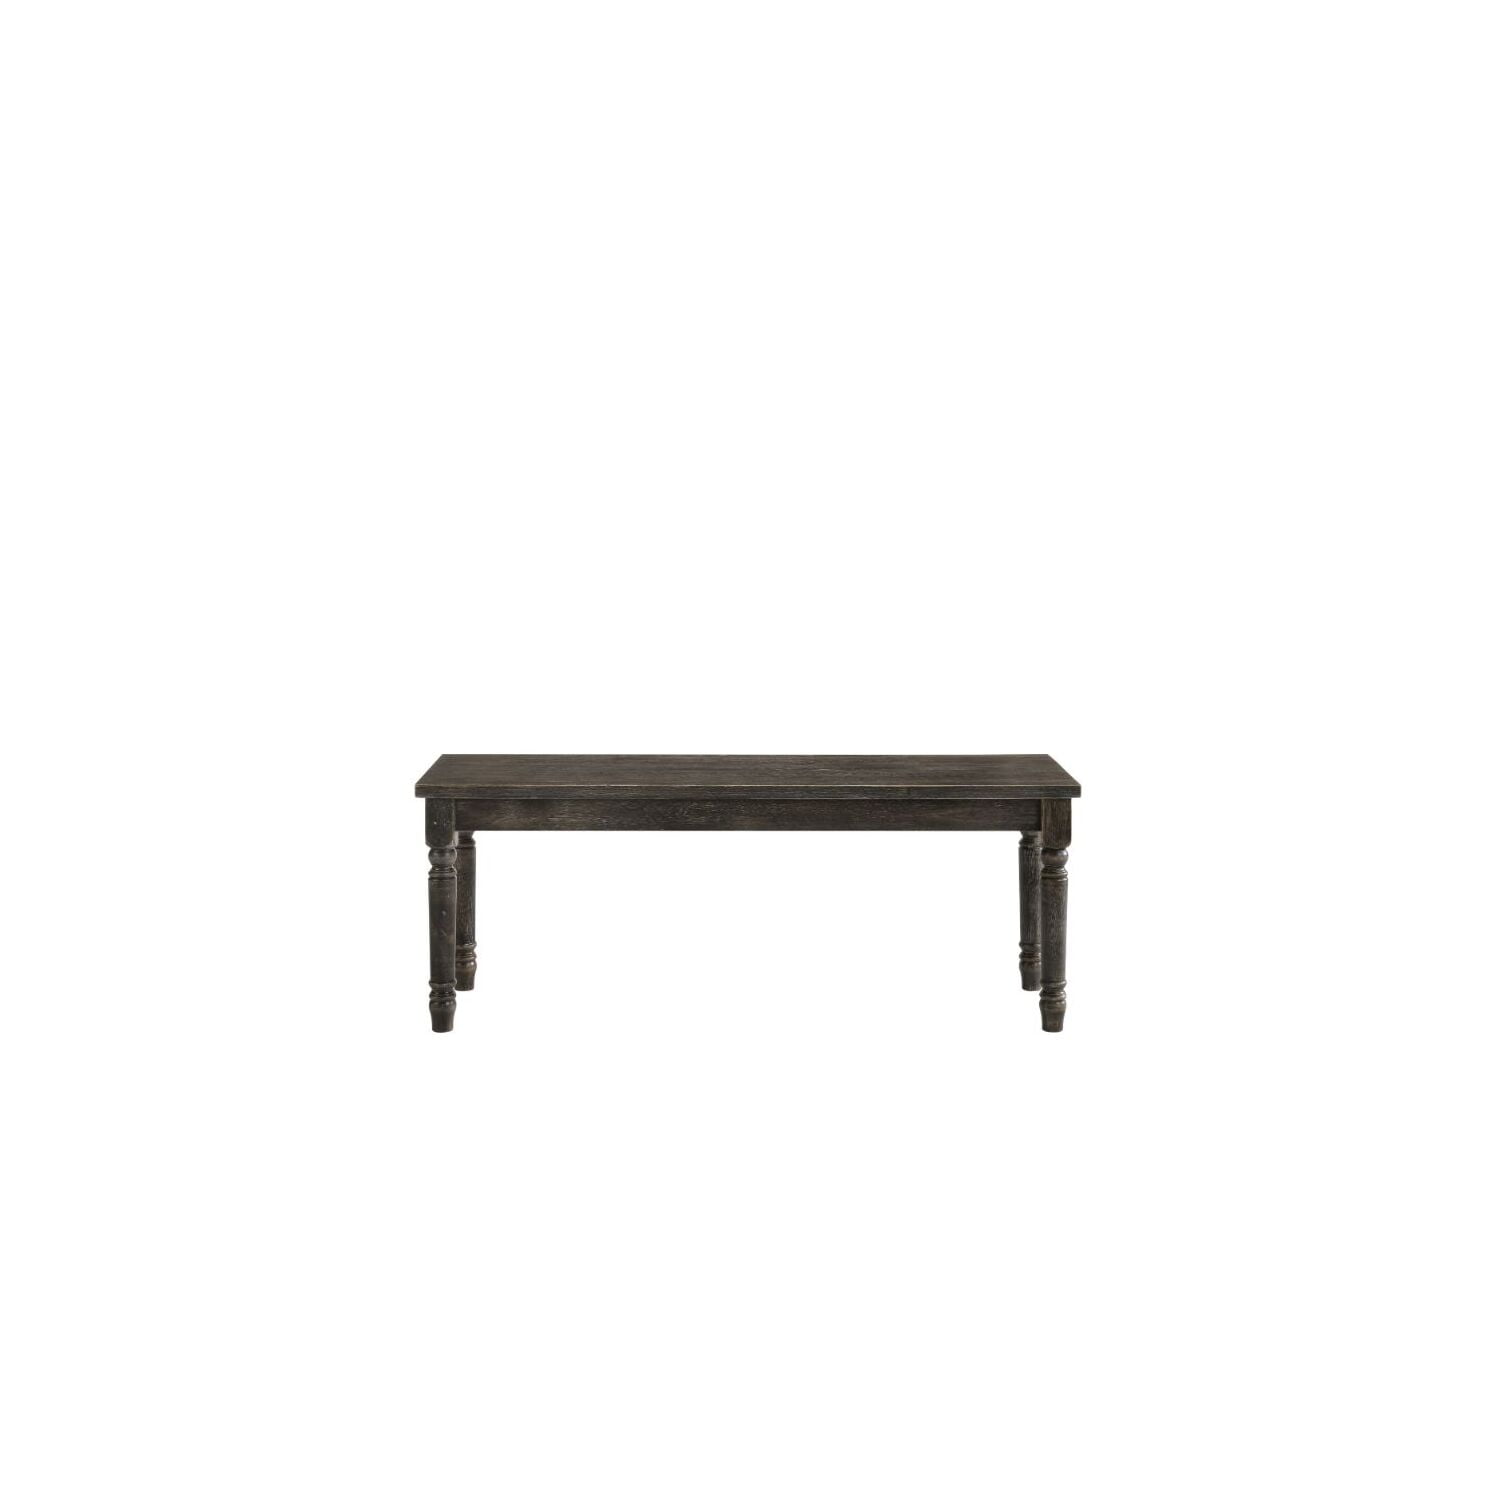 Picture of ACME 71883 Claudia II Bench, Weathered Gray - 18 x 47 x 14 in.